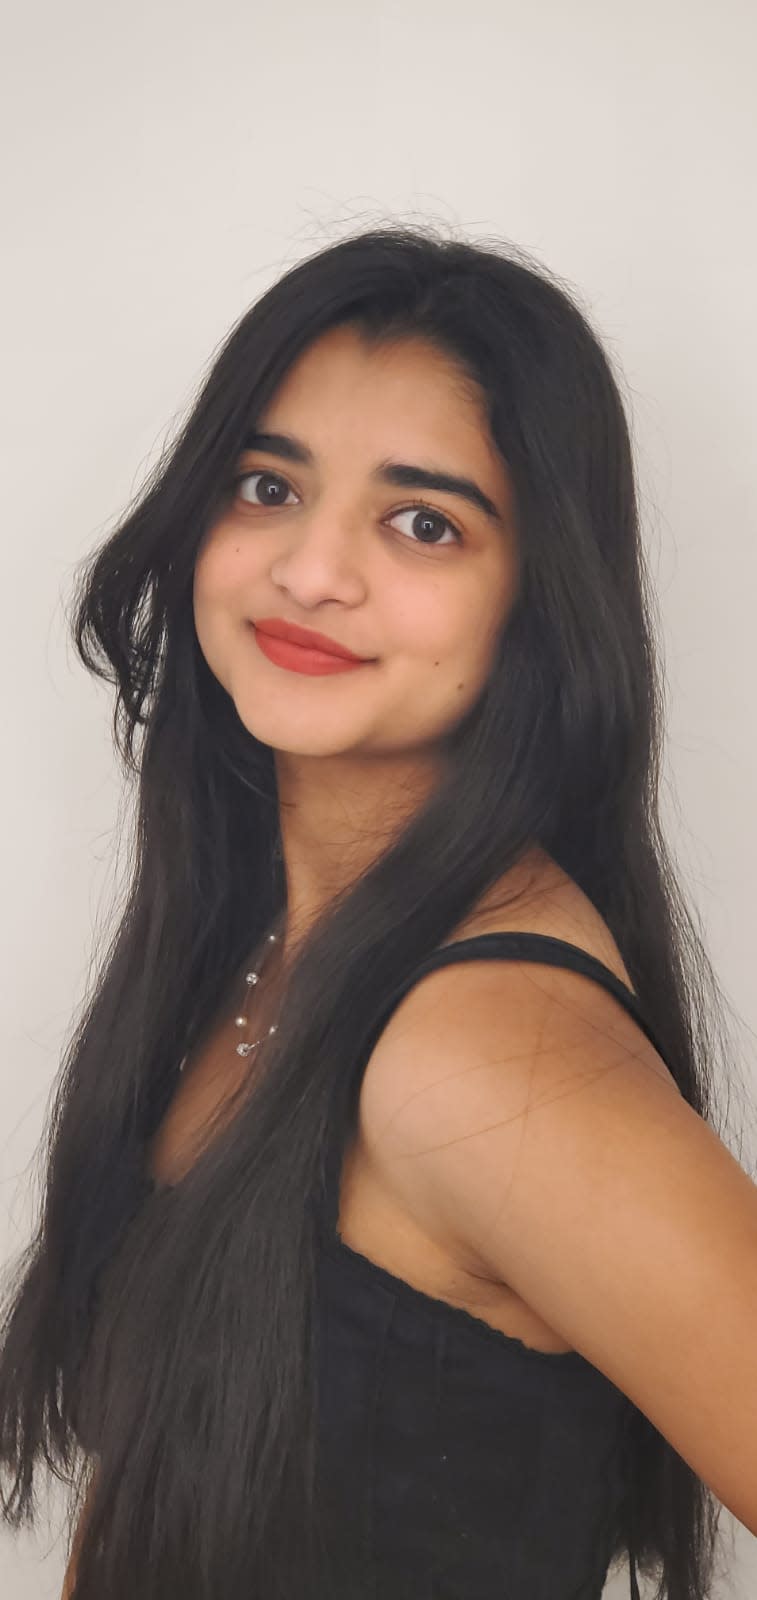 Esha Doshi, who is graduating from Embry-Riddle Aeronautical University with a master's degree in business administration this year after earning an aerospace engineering bachelor's degree in 2023, says she found inspiration from the school's location, abutting Daytona Beach International Airport.